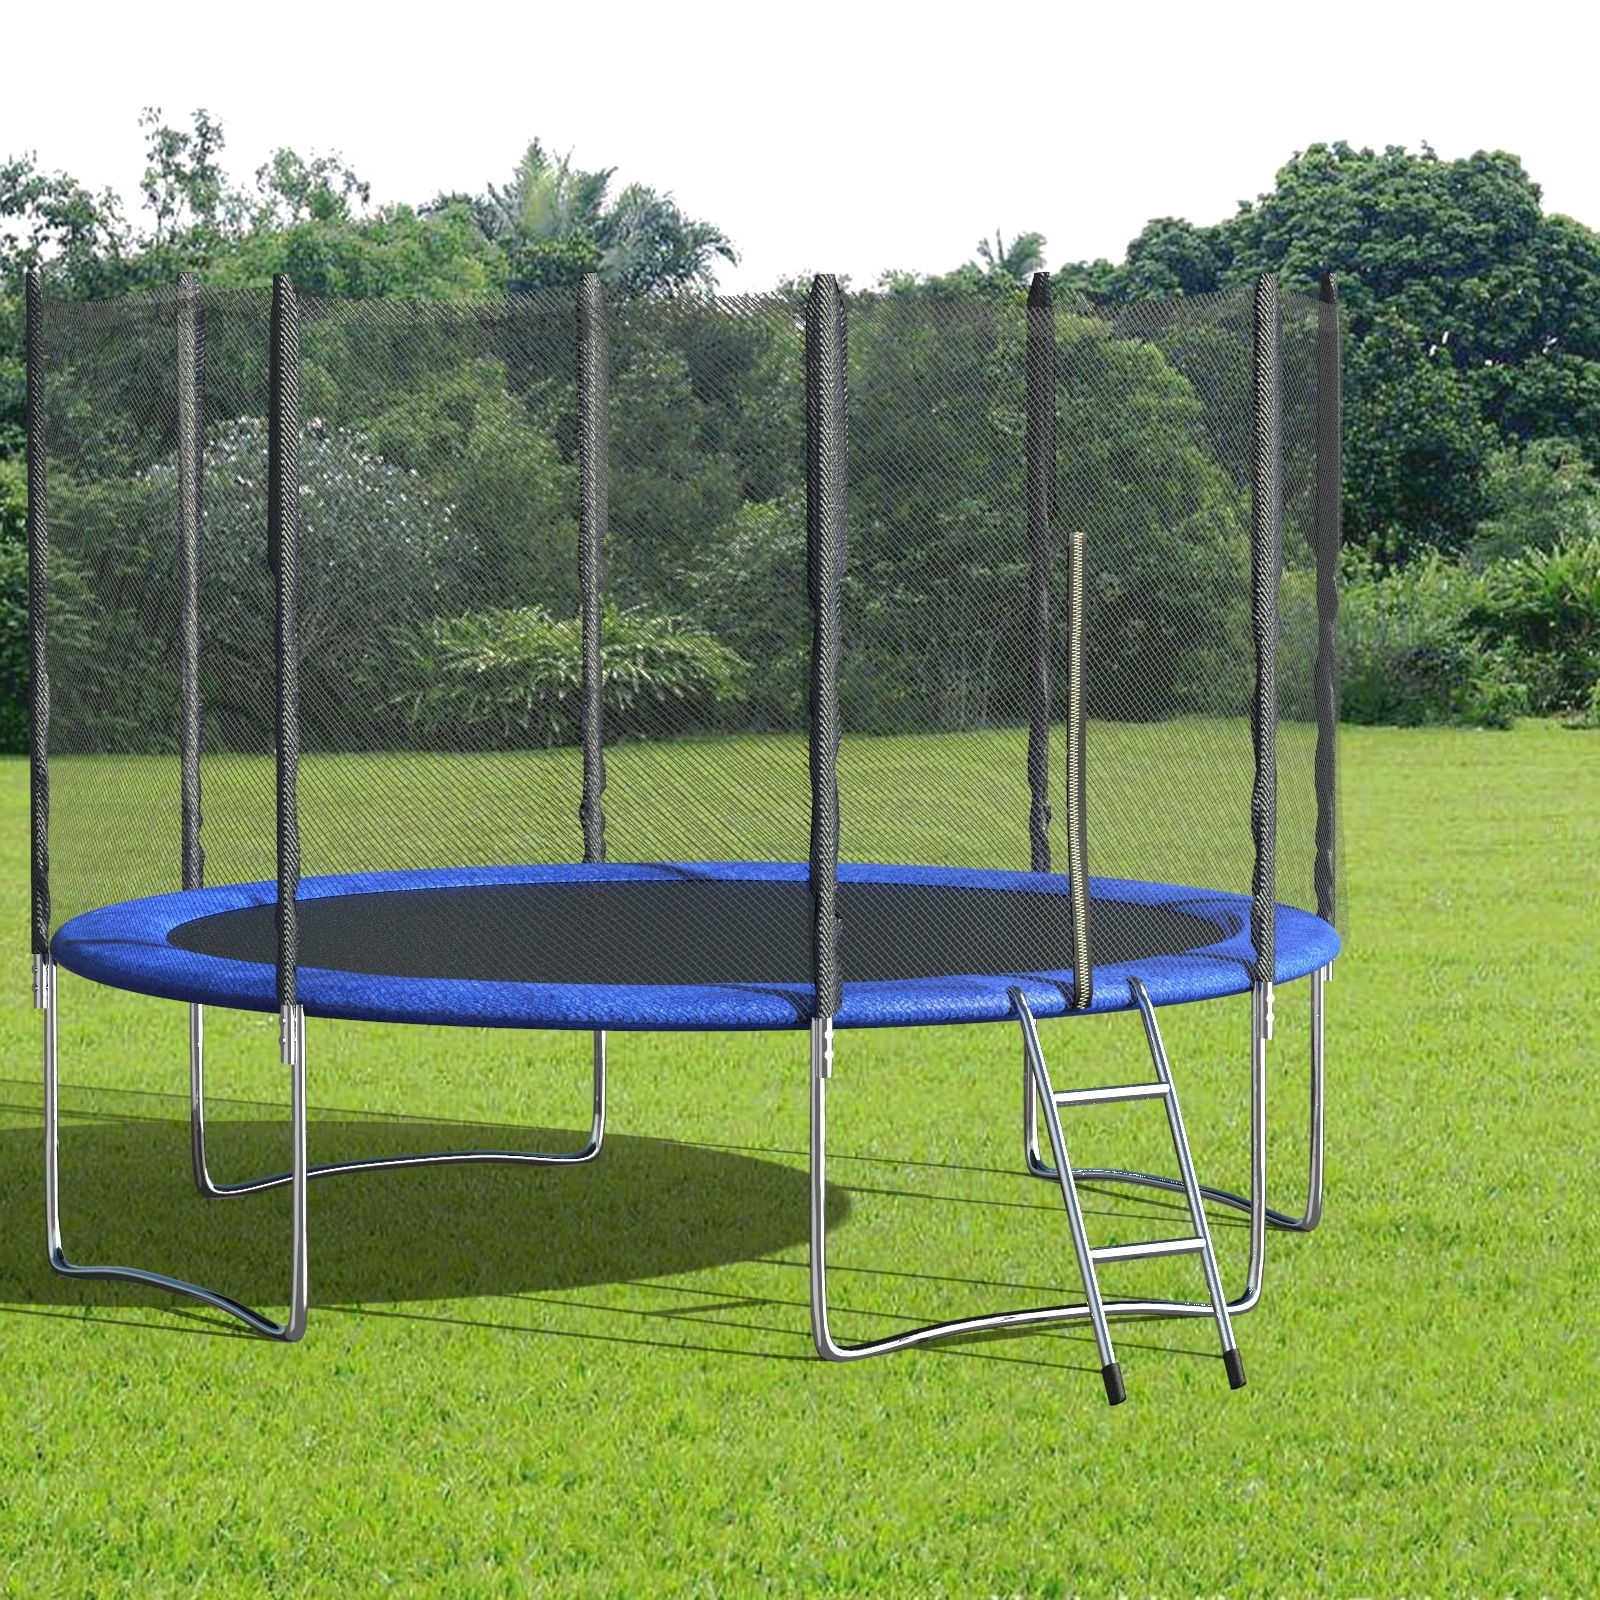 FUFU&GAGA Trampoline 12-ft Round Backyard in in the Trampolines at Lowes.com